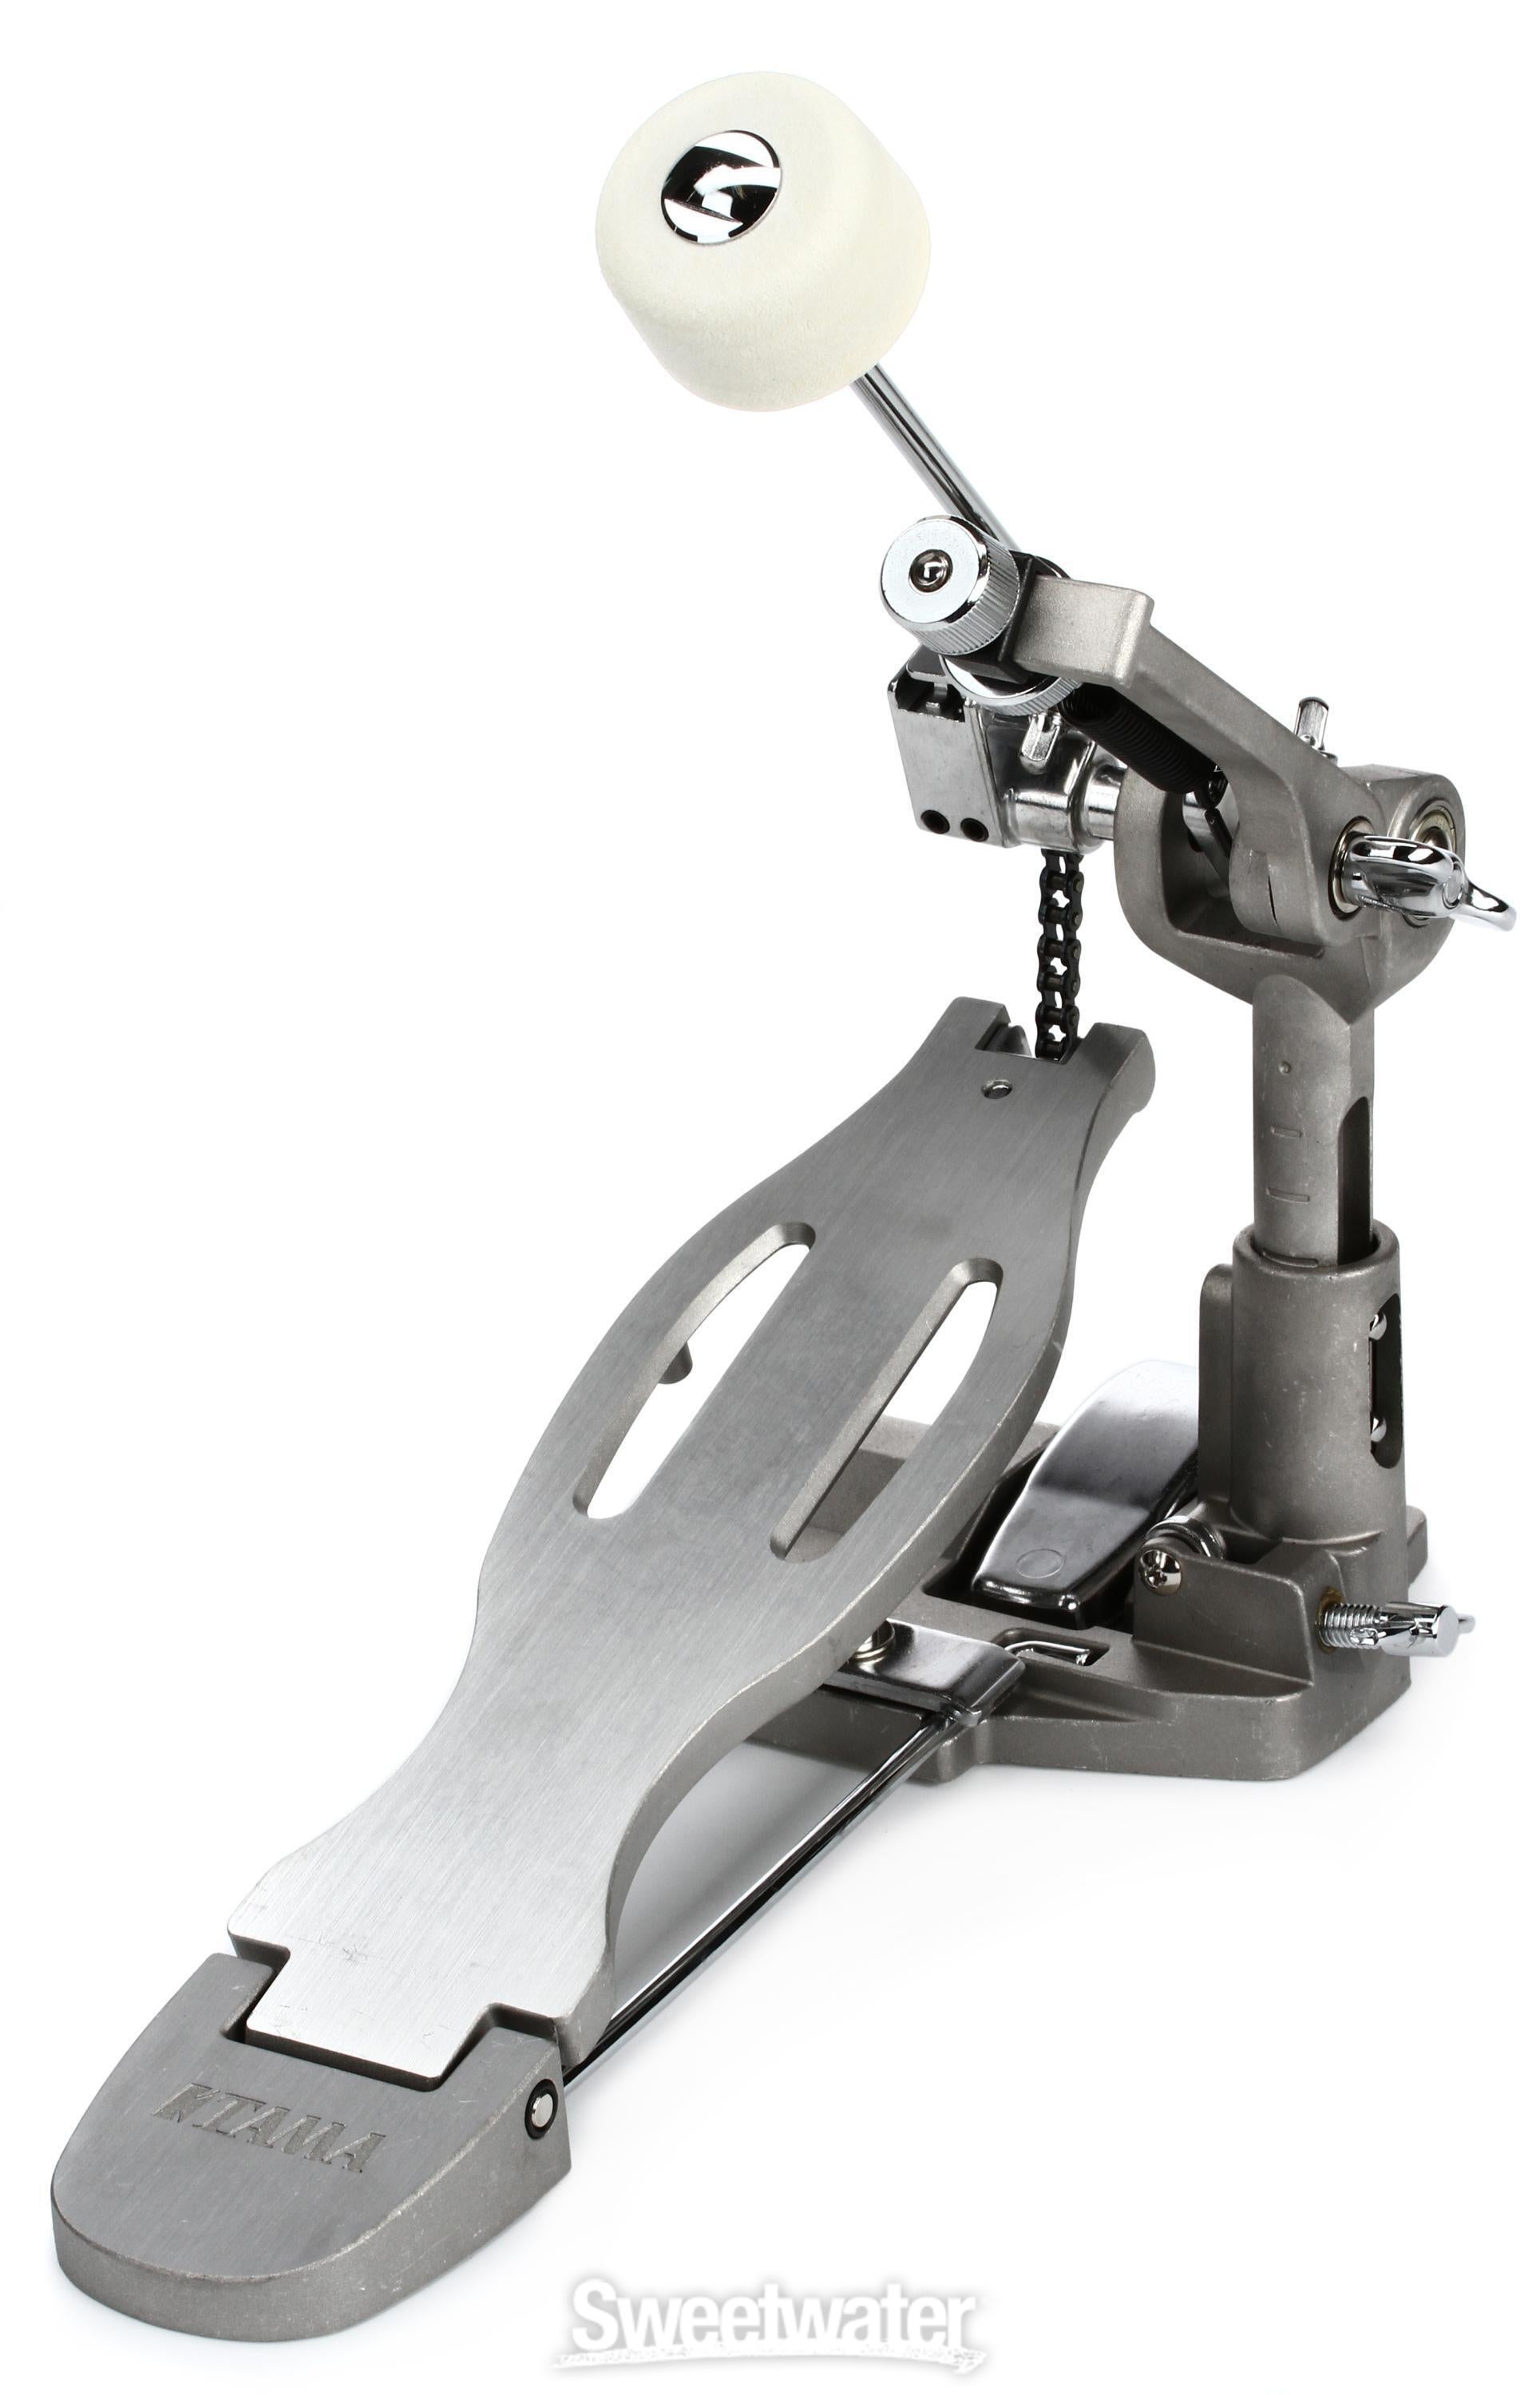 Tama HP50 The Classic Single Bass Drum Pedal | Sweetwater